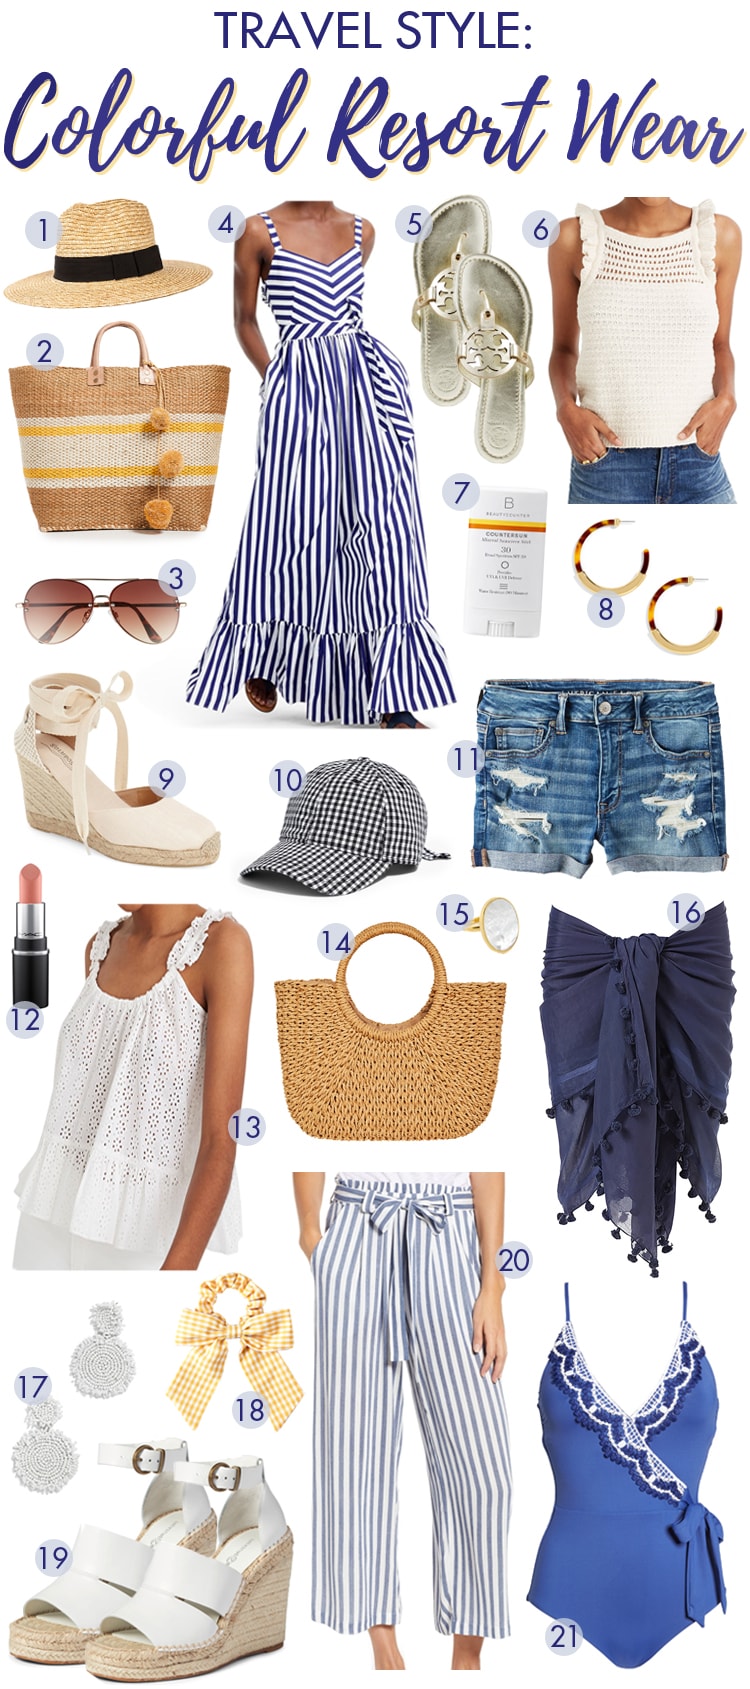 Travel Style: Colorful Resort Wear